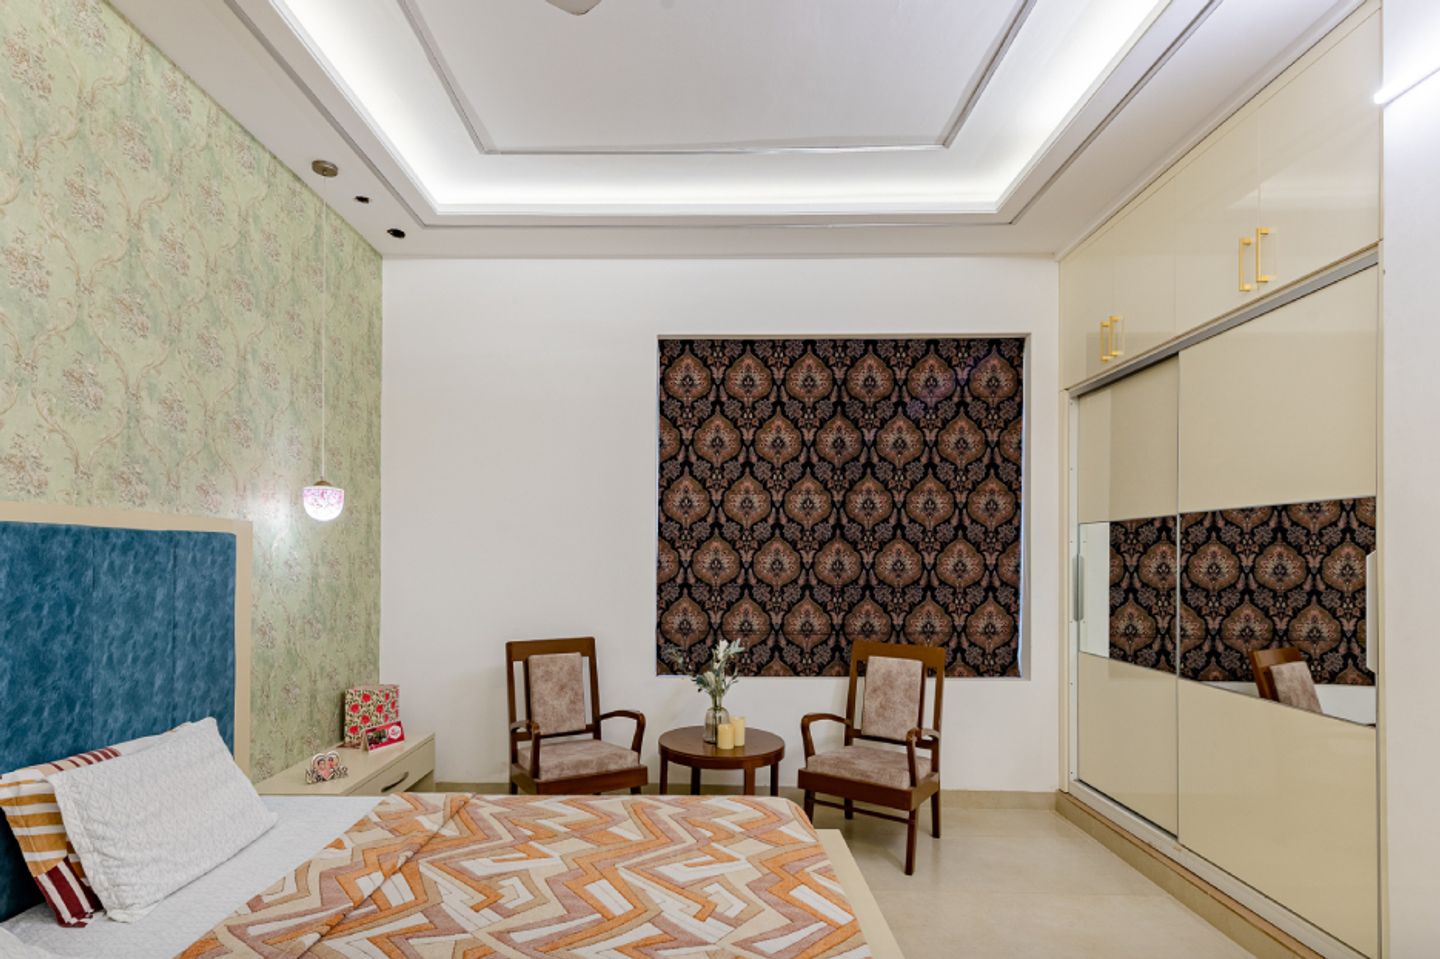 False Ceiling Design With White Tone For Bedroom - Livspace